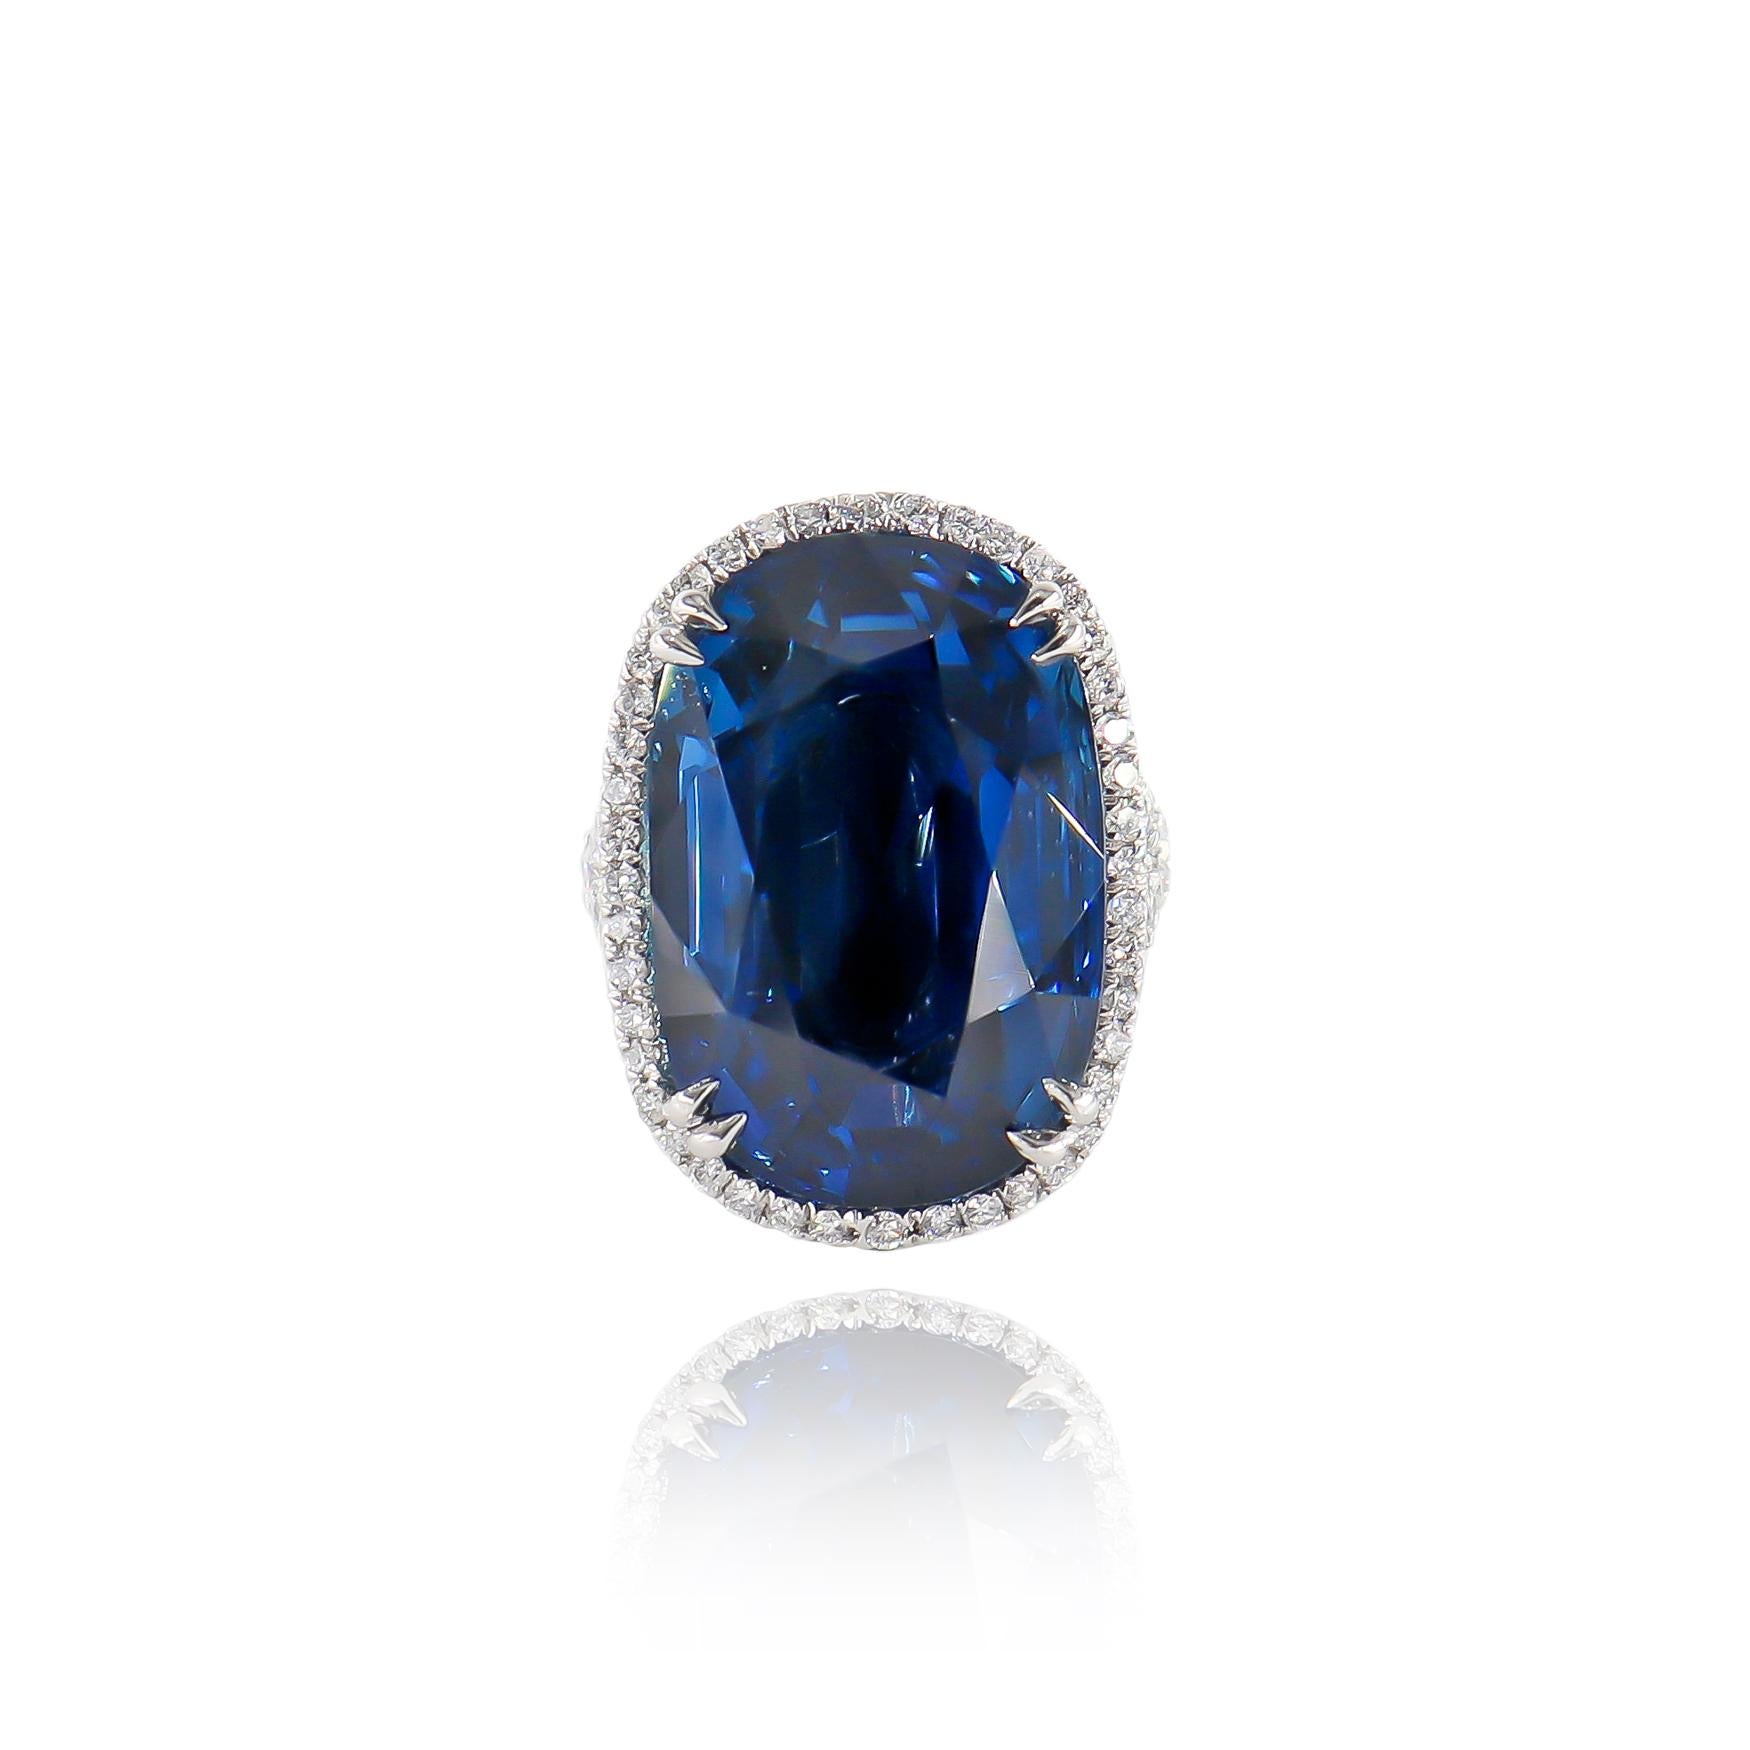 This incredible piece from the J. Birnbach vault features a 38.56 carat oval sapphire of transparent, blue color and Burma (Myanmar) origin with no indications of heat treatment (a true rarity in the gemstone marketplace*). Set in a handmade,